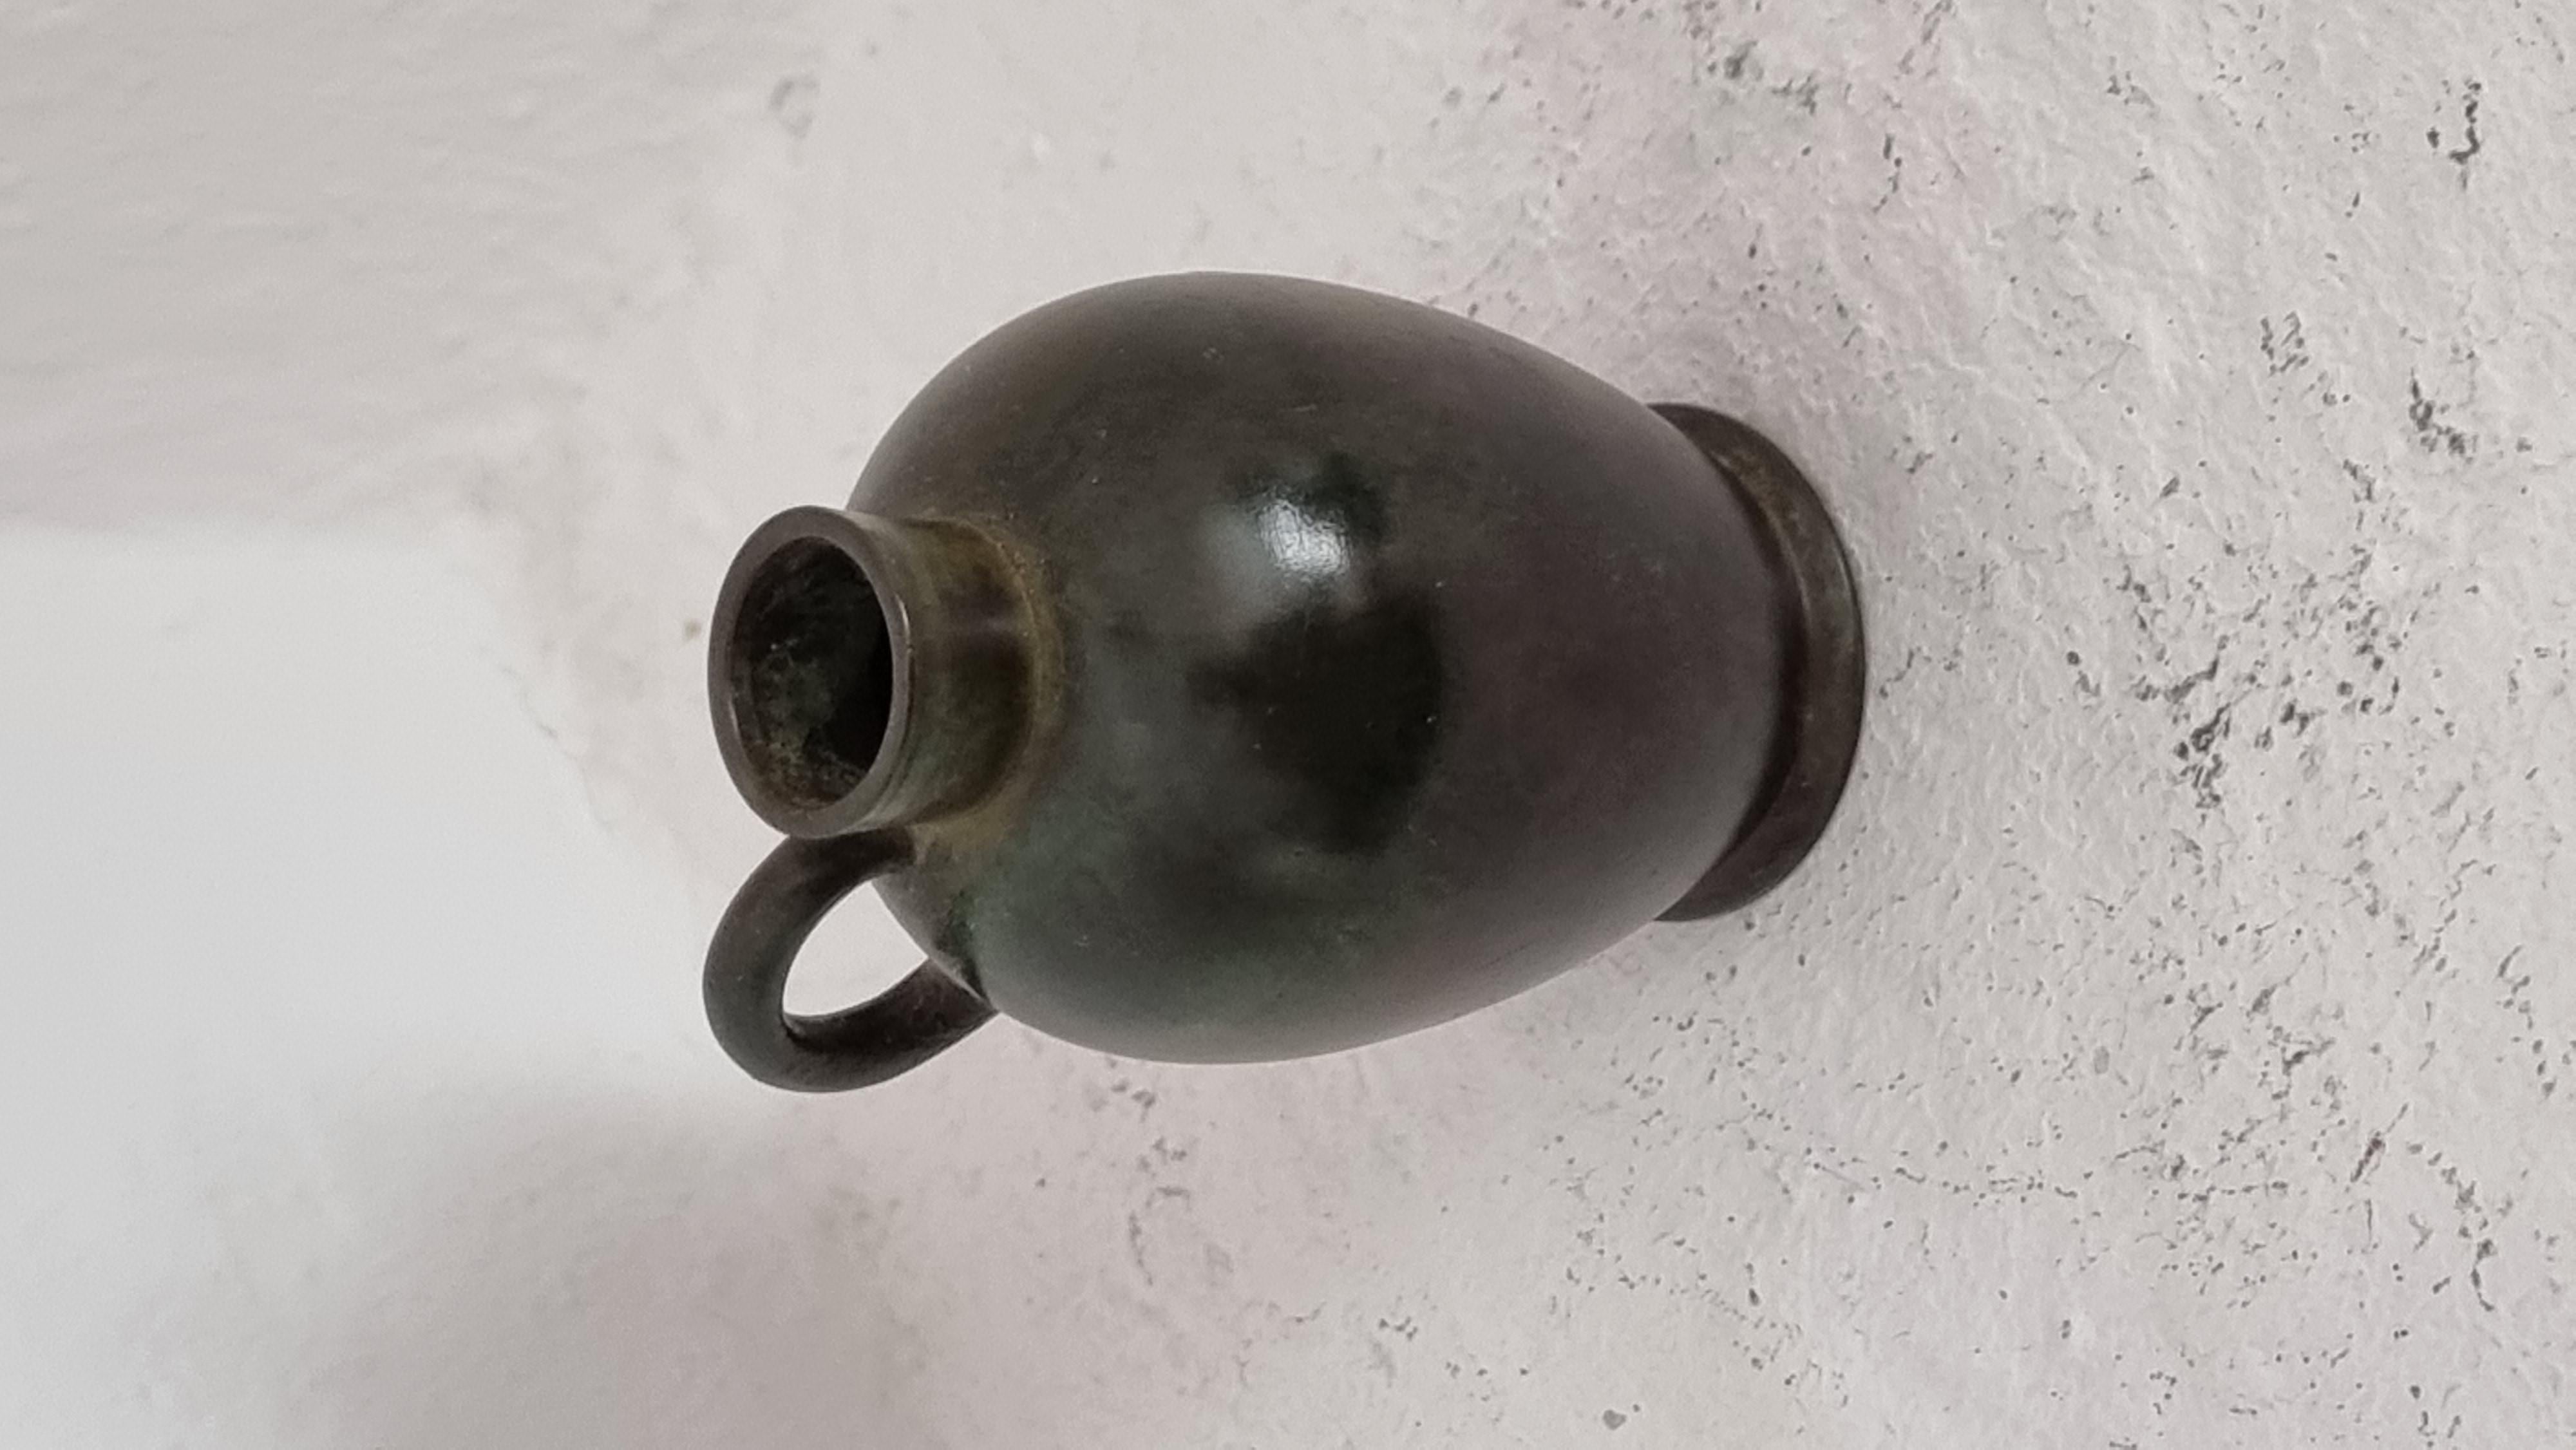 Solid bronze vase by Guldaktiebolaget, most likely designed by Jacob Ängman. Swedish grace / Art Deco, 1920/30s. 


Normal patina, signs of age and wear. 